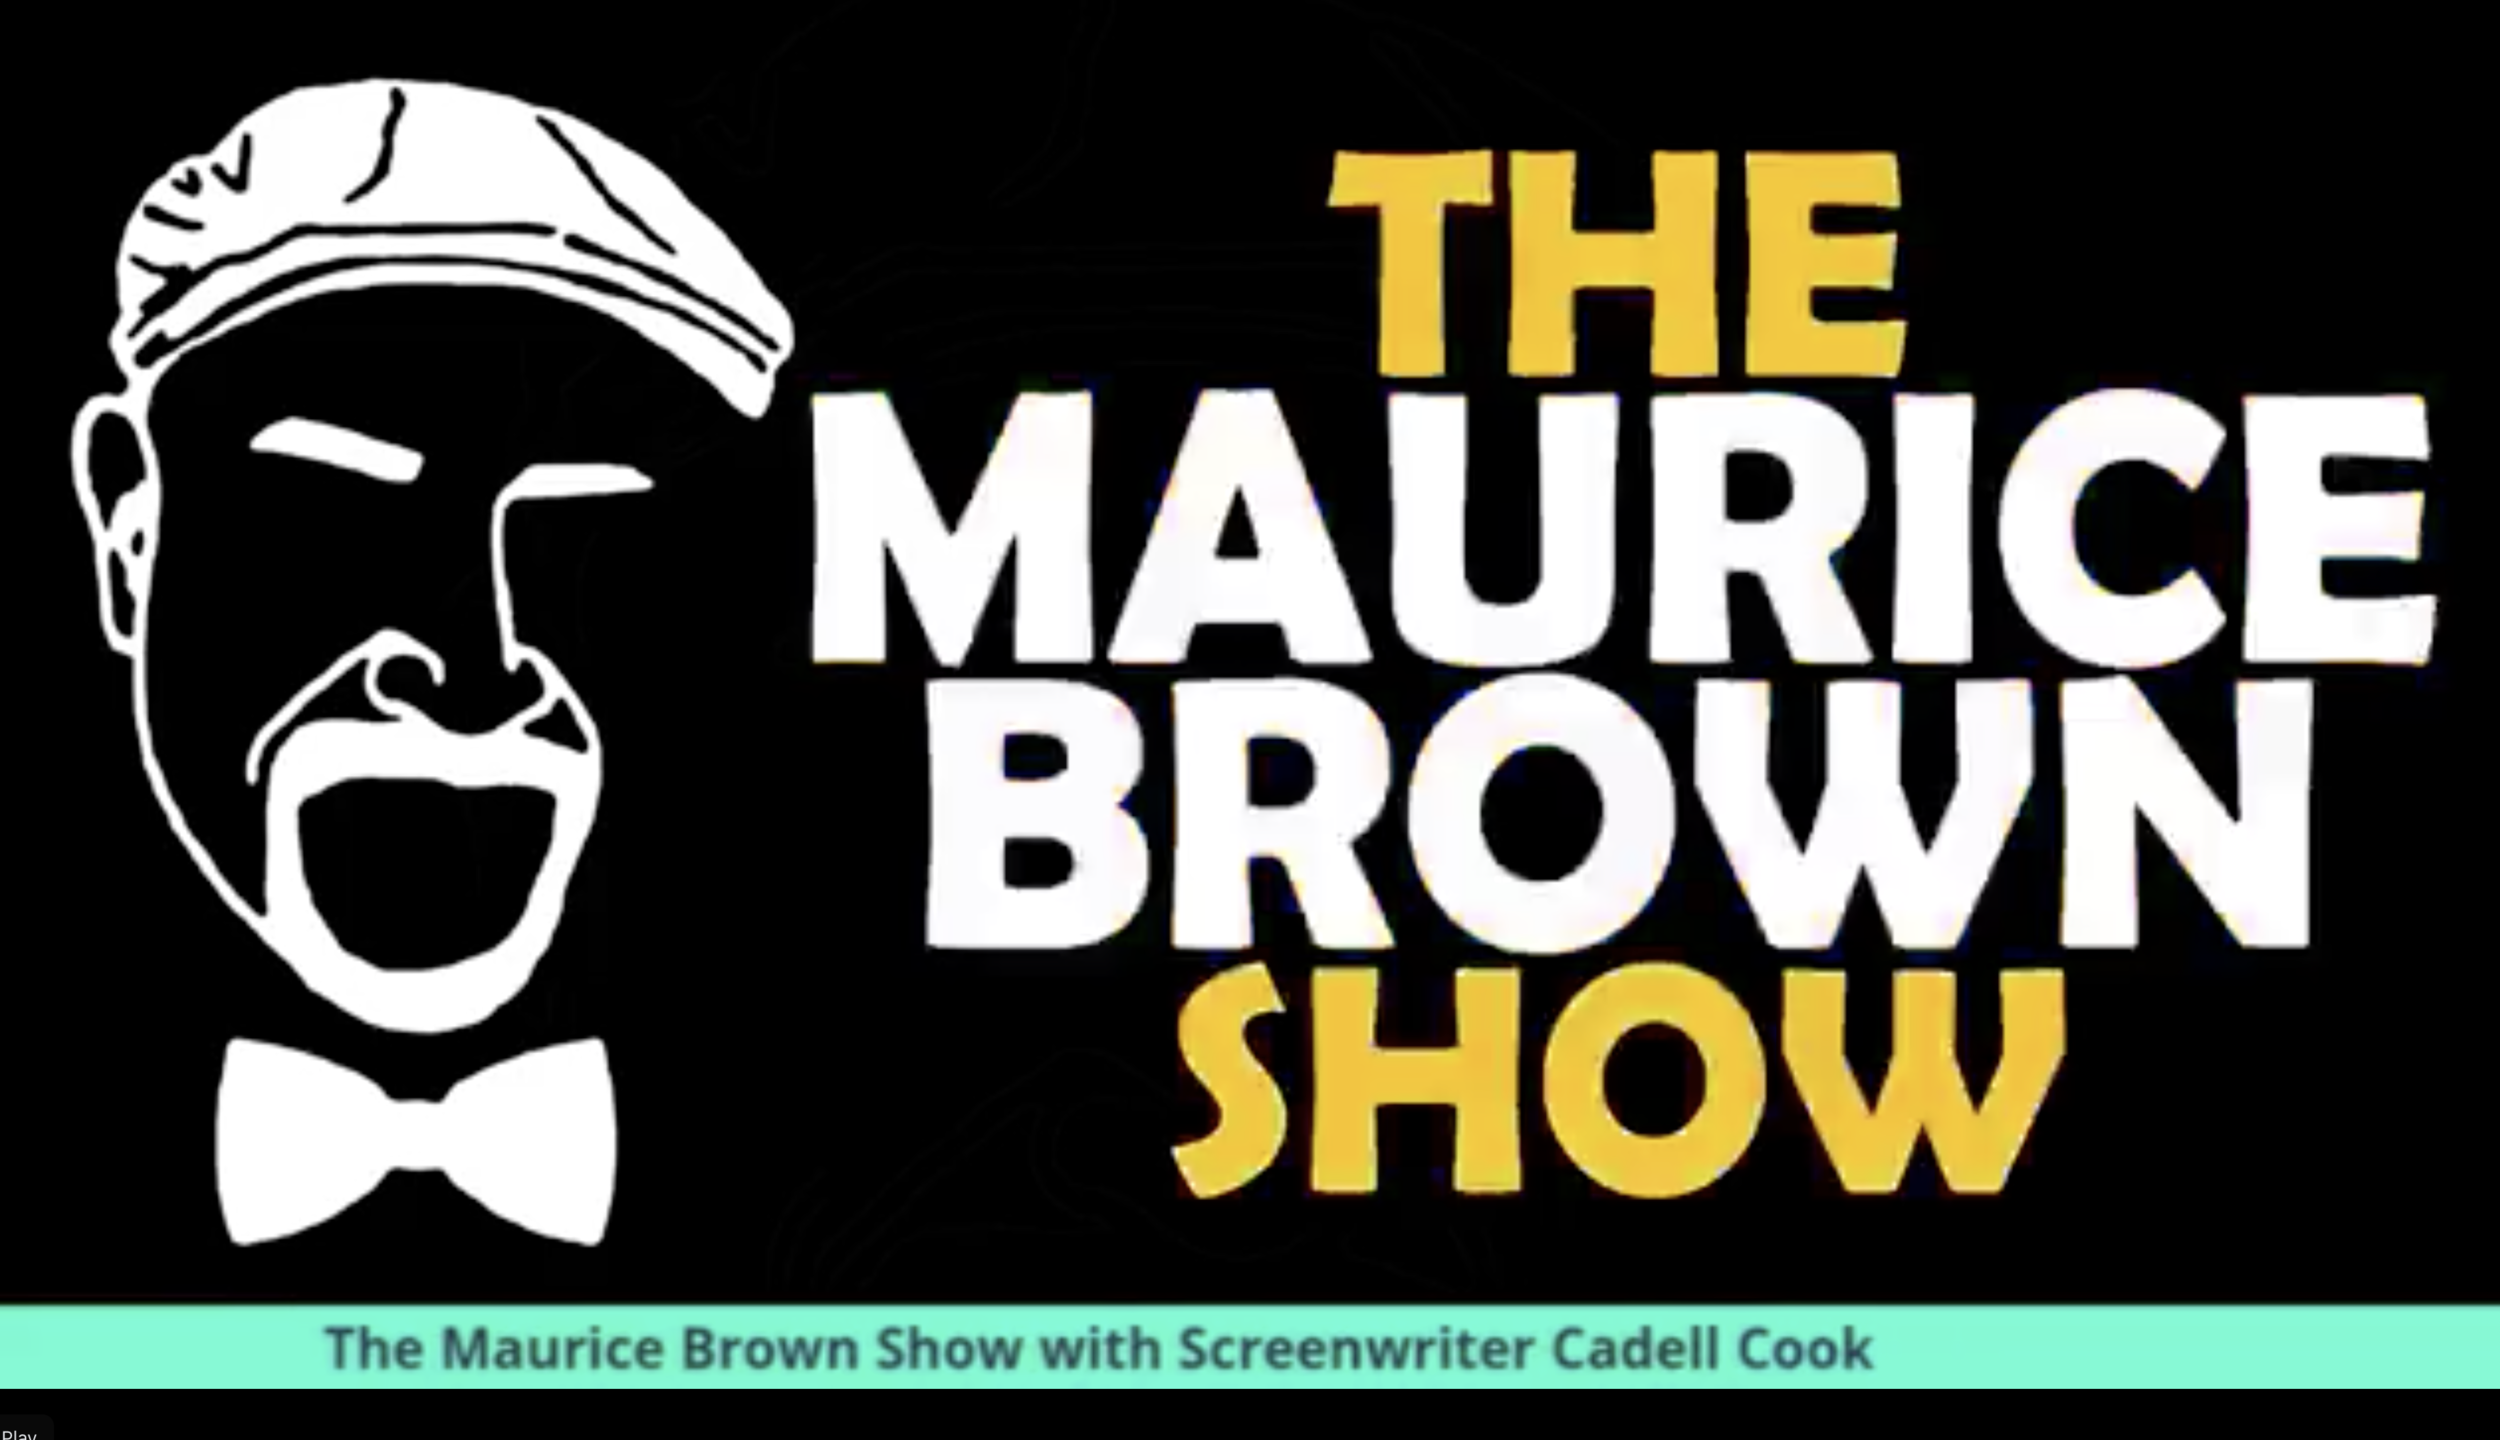 the maurice brown show cover.png